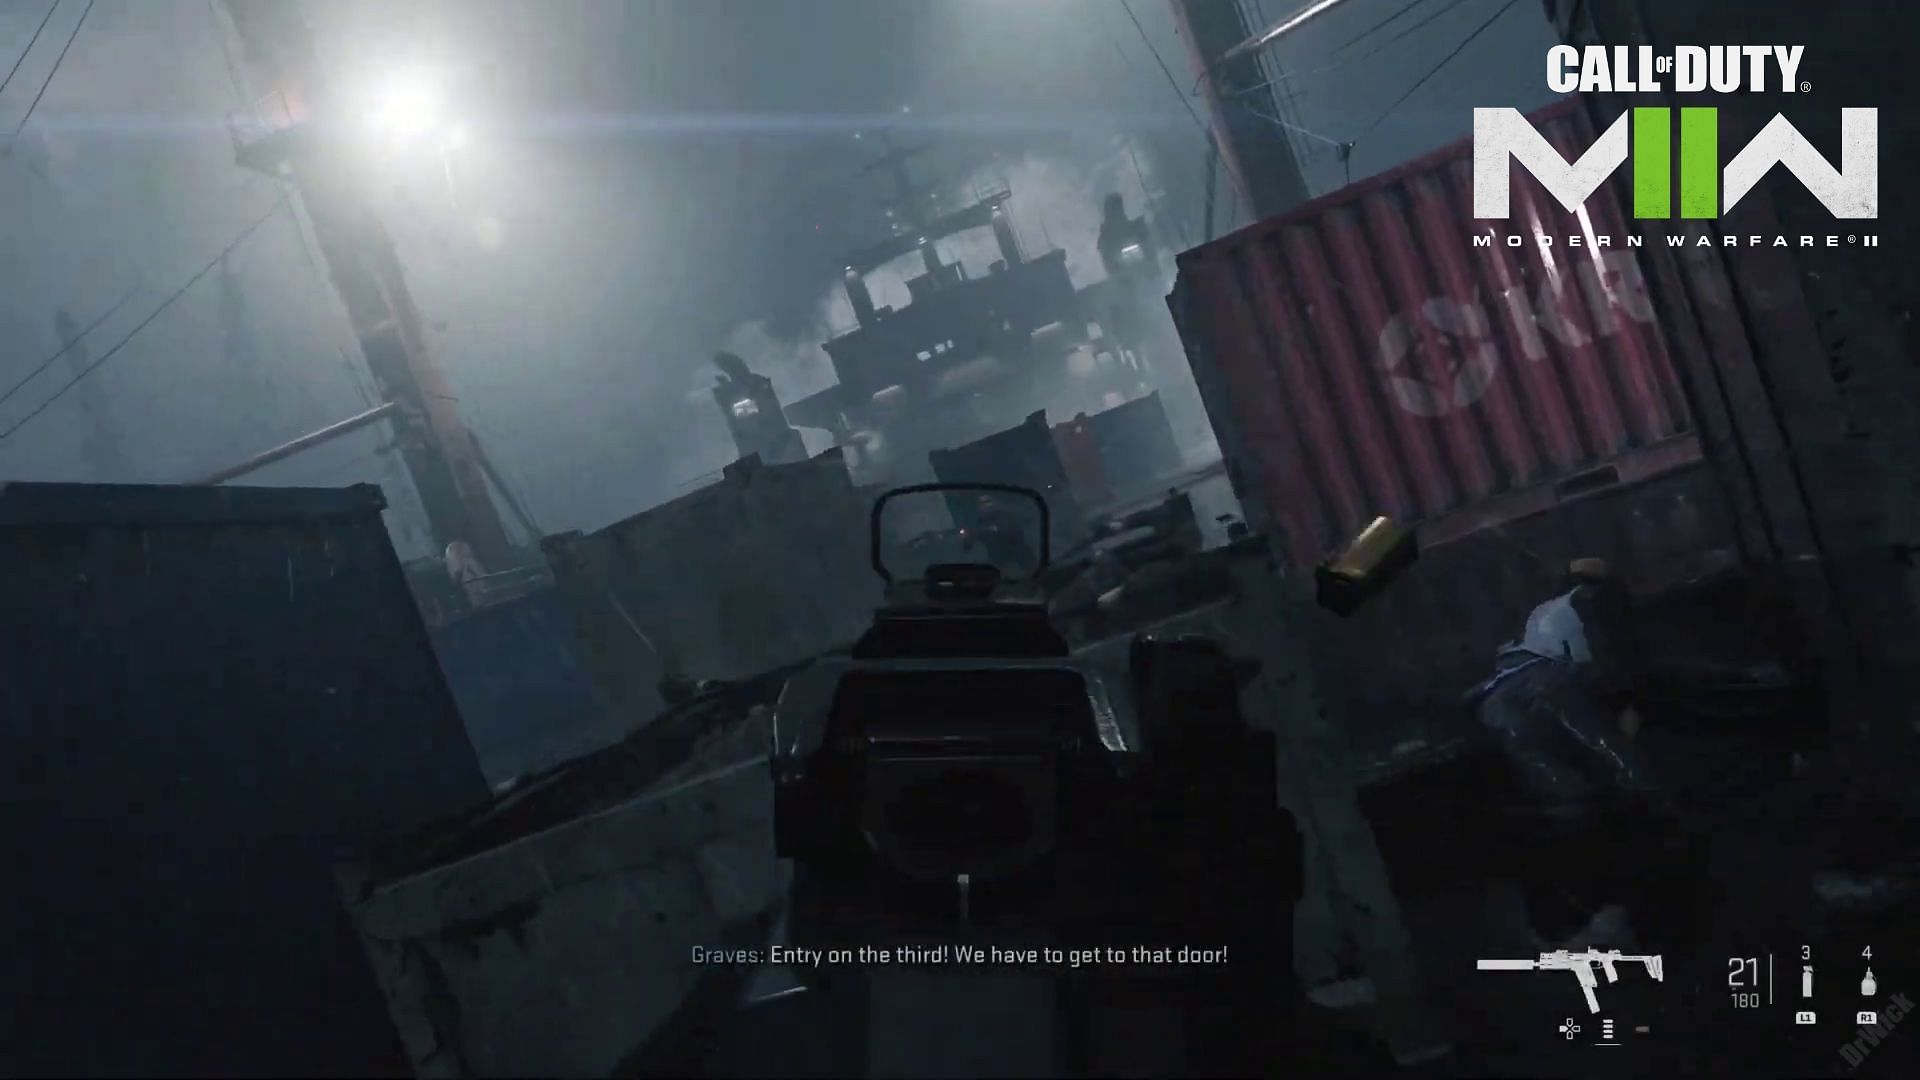 Sliding Containers in the ship (image via Activision)